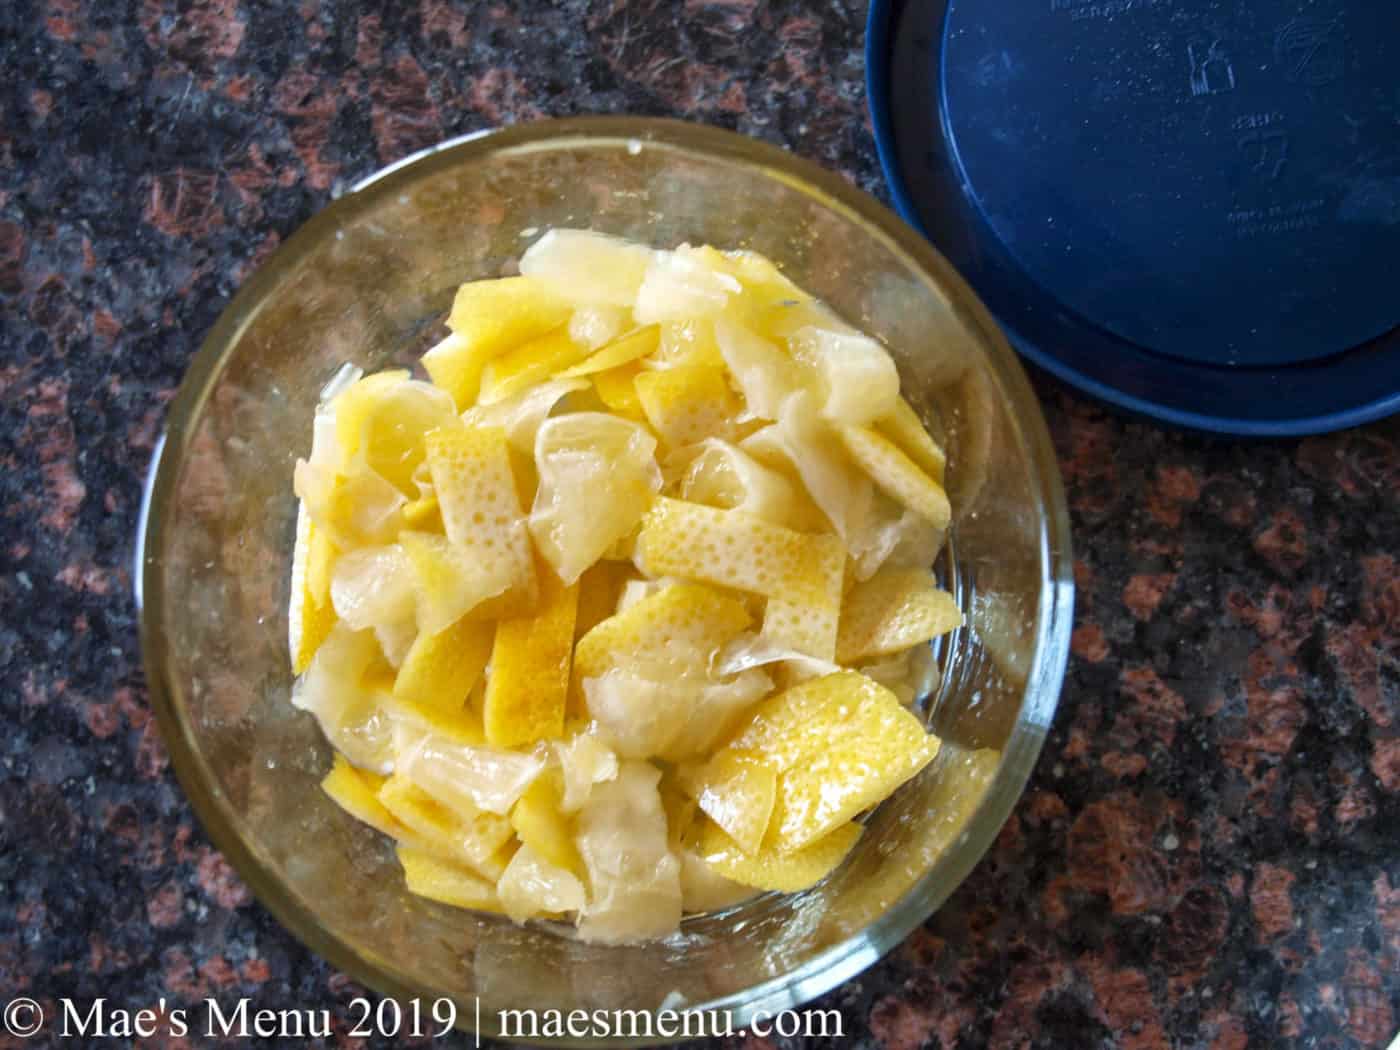 Quick Preserved Lemons in a glass bowl on a black granite counter. Blue lid to the bowl on the counter next to the bowl.